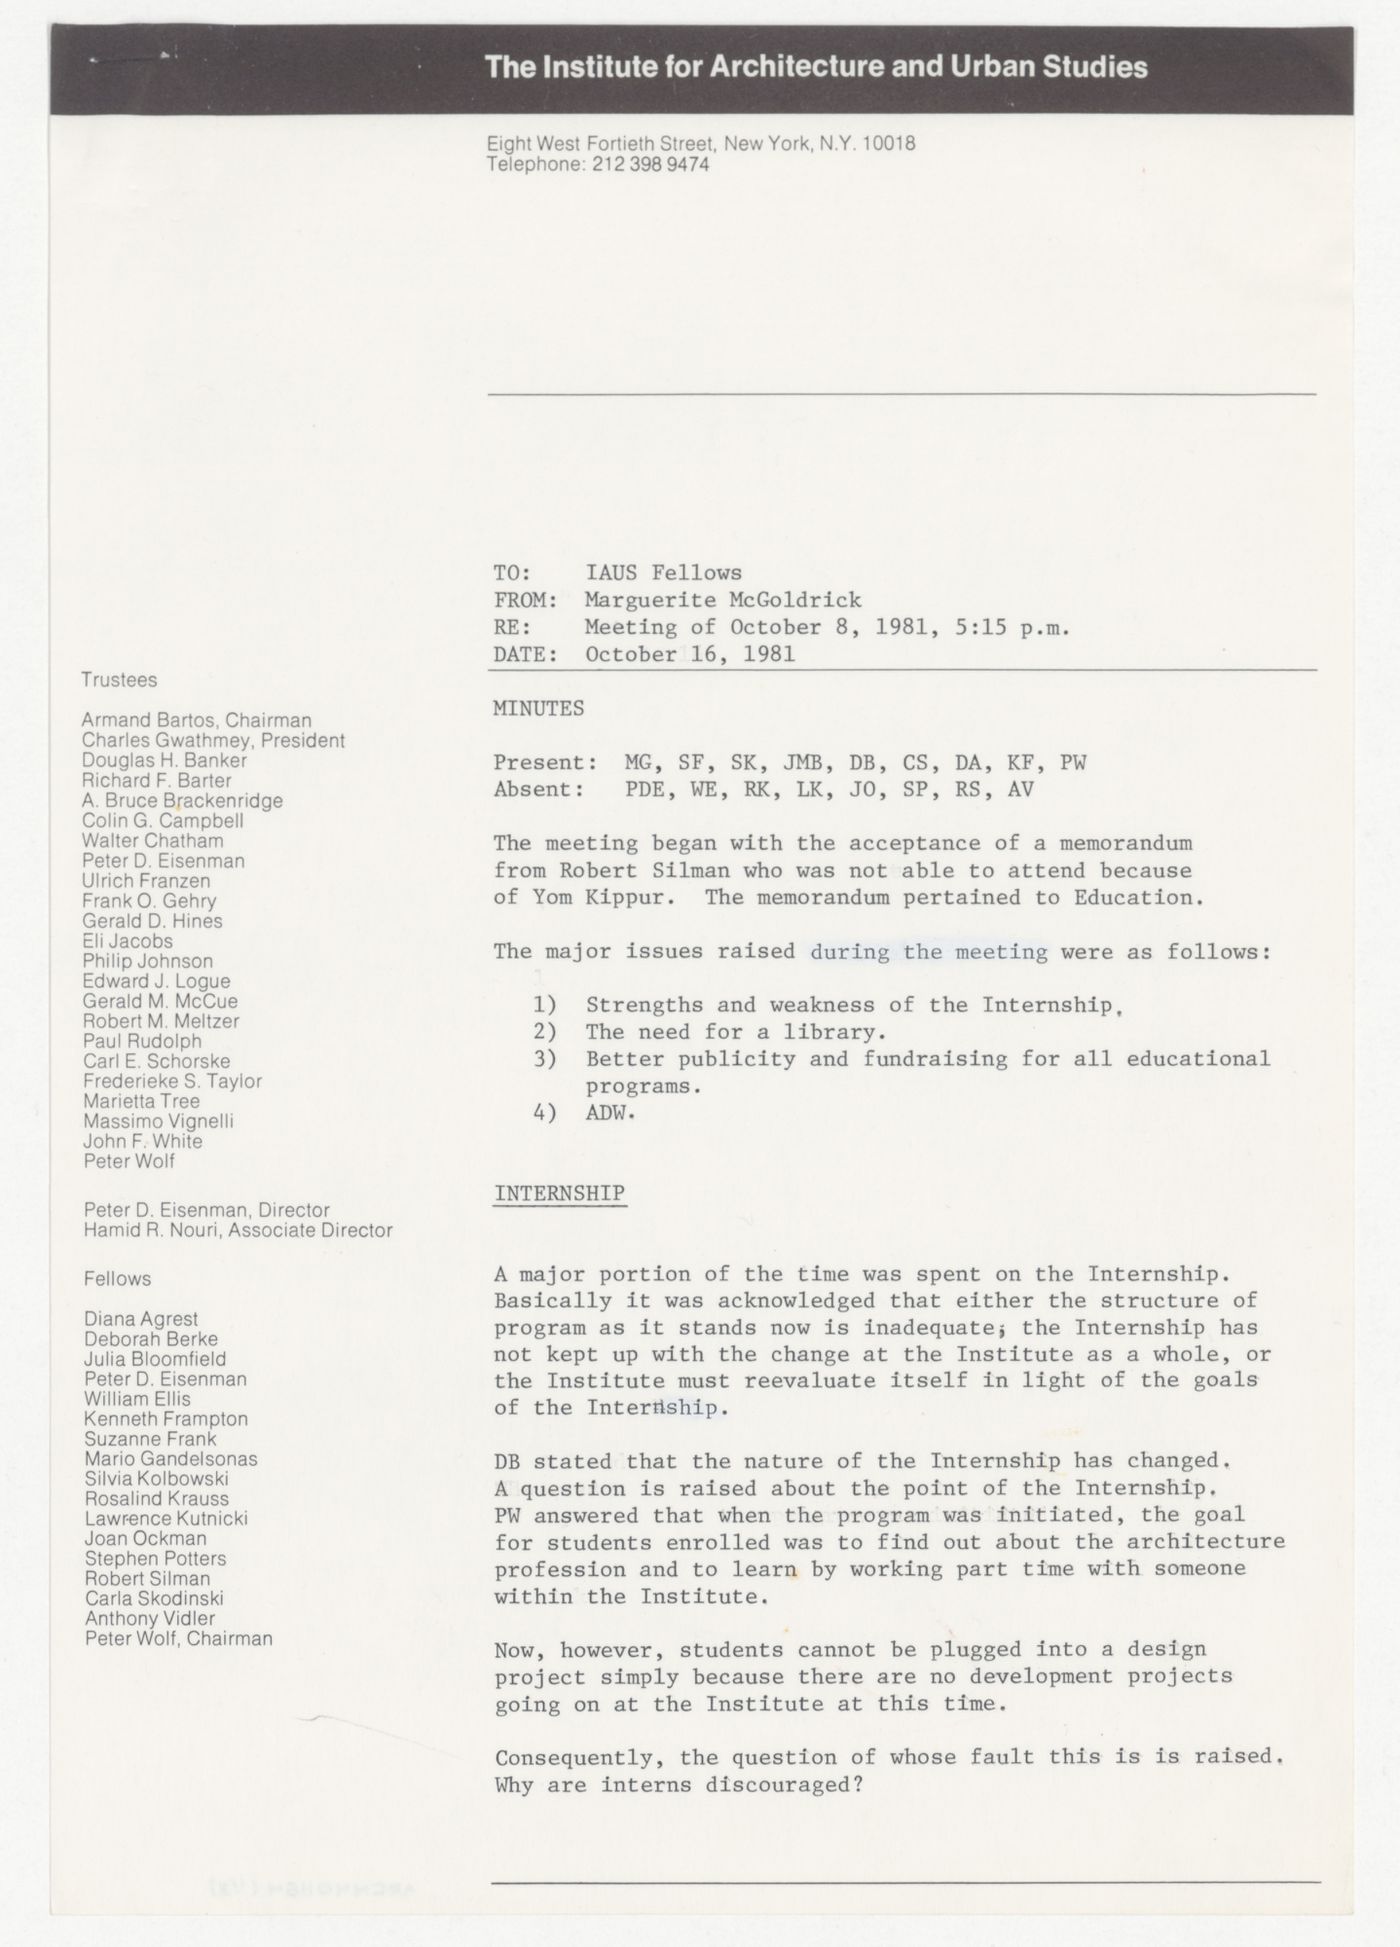 Minutes of meeting of the Fellows on October 8th, 1981